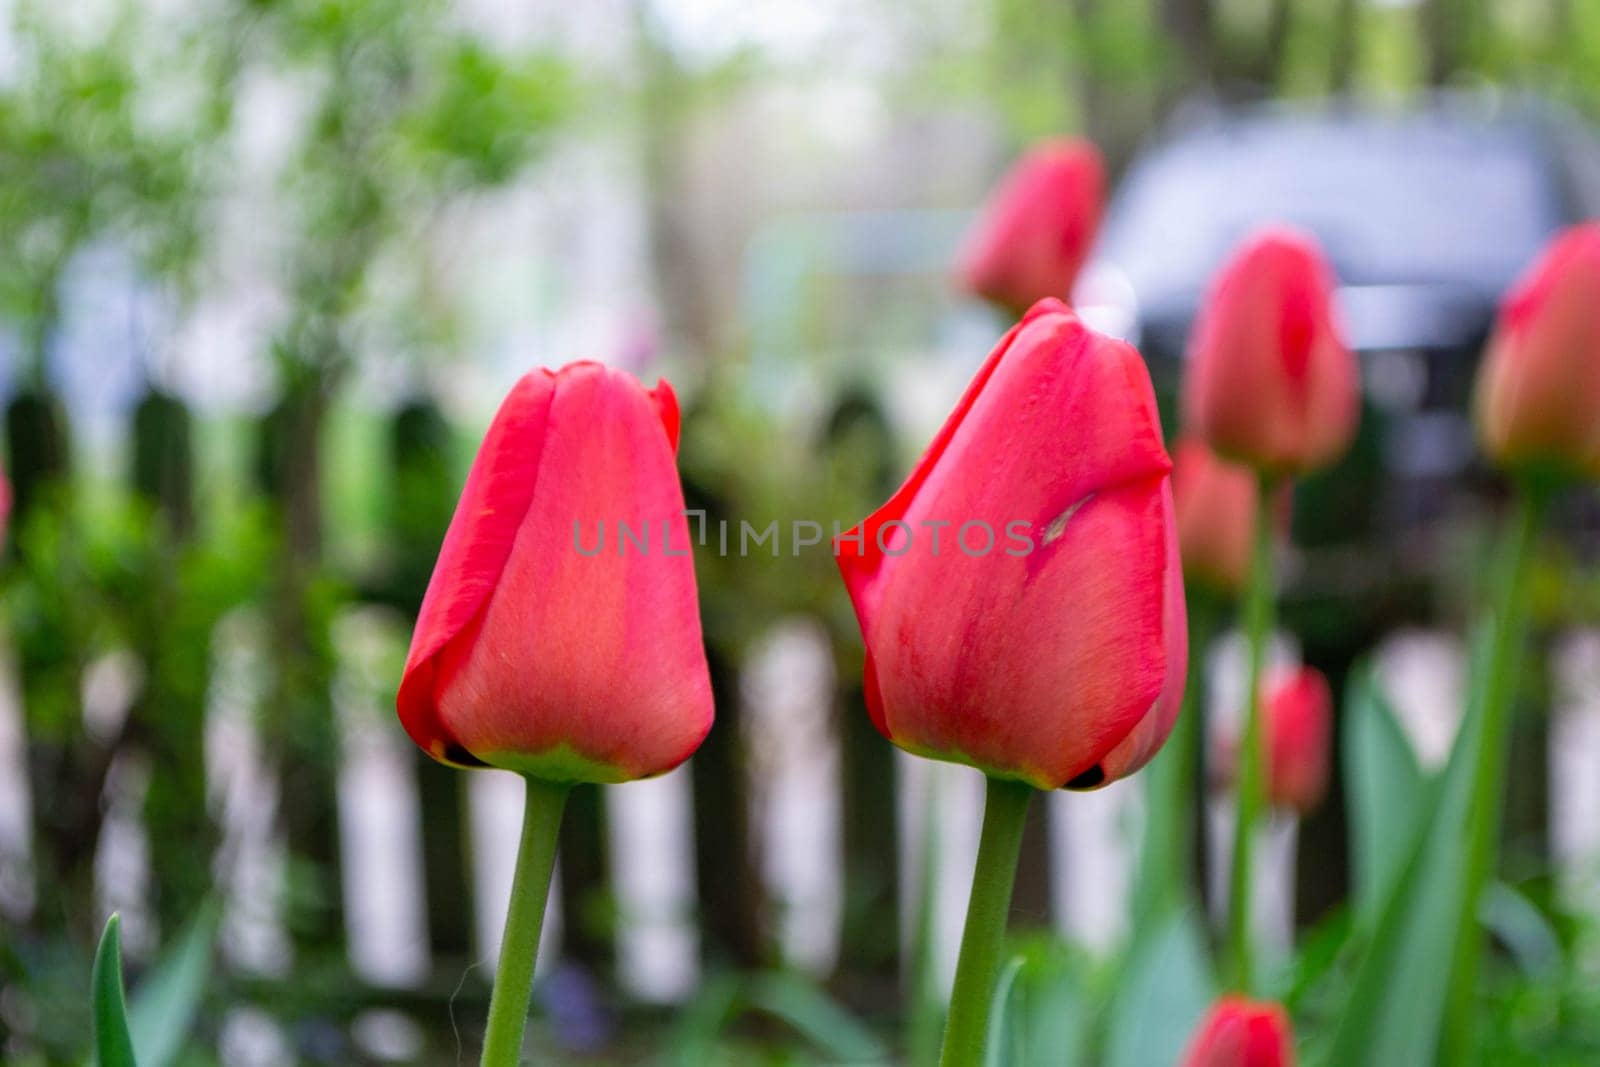 Spring Tulips in bloom with red and green colors.